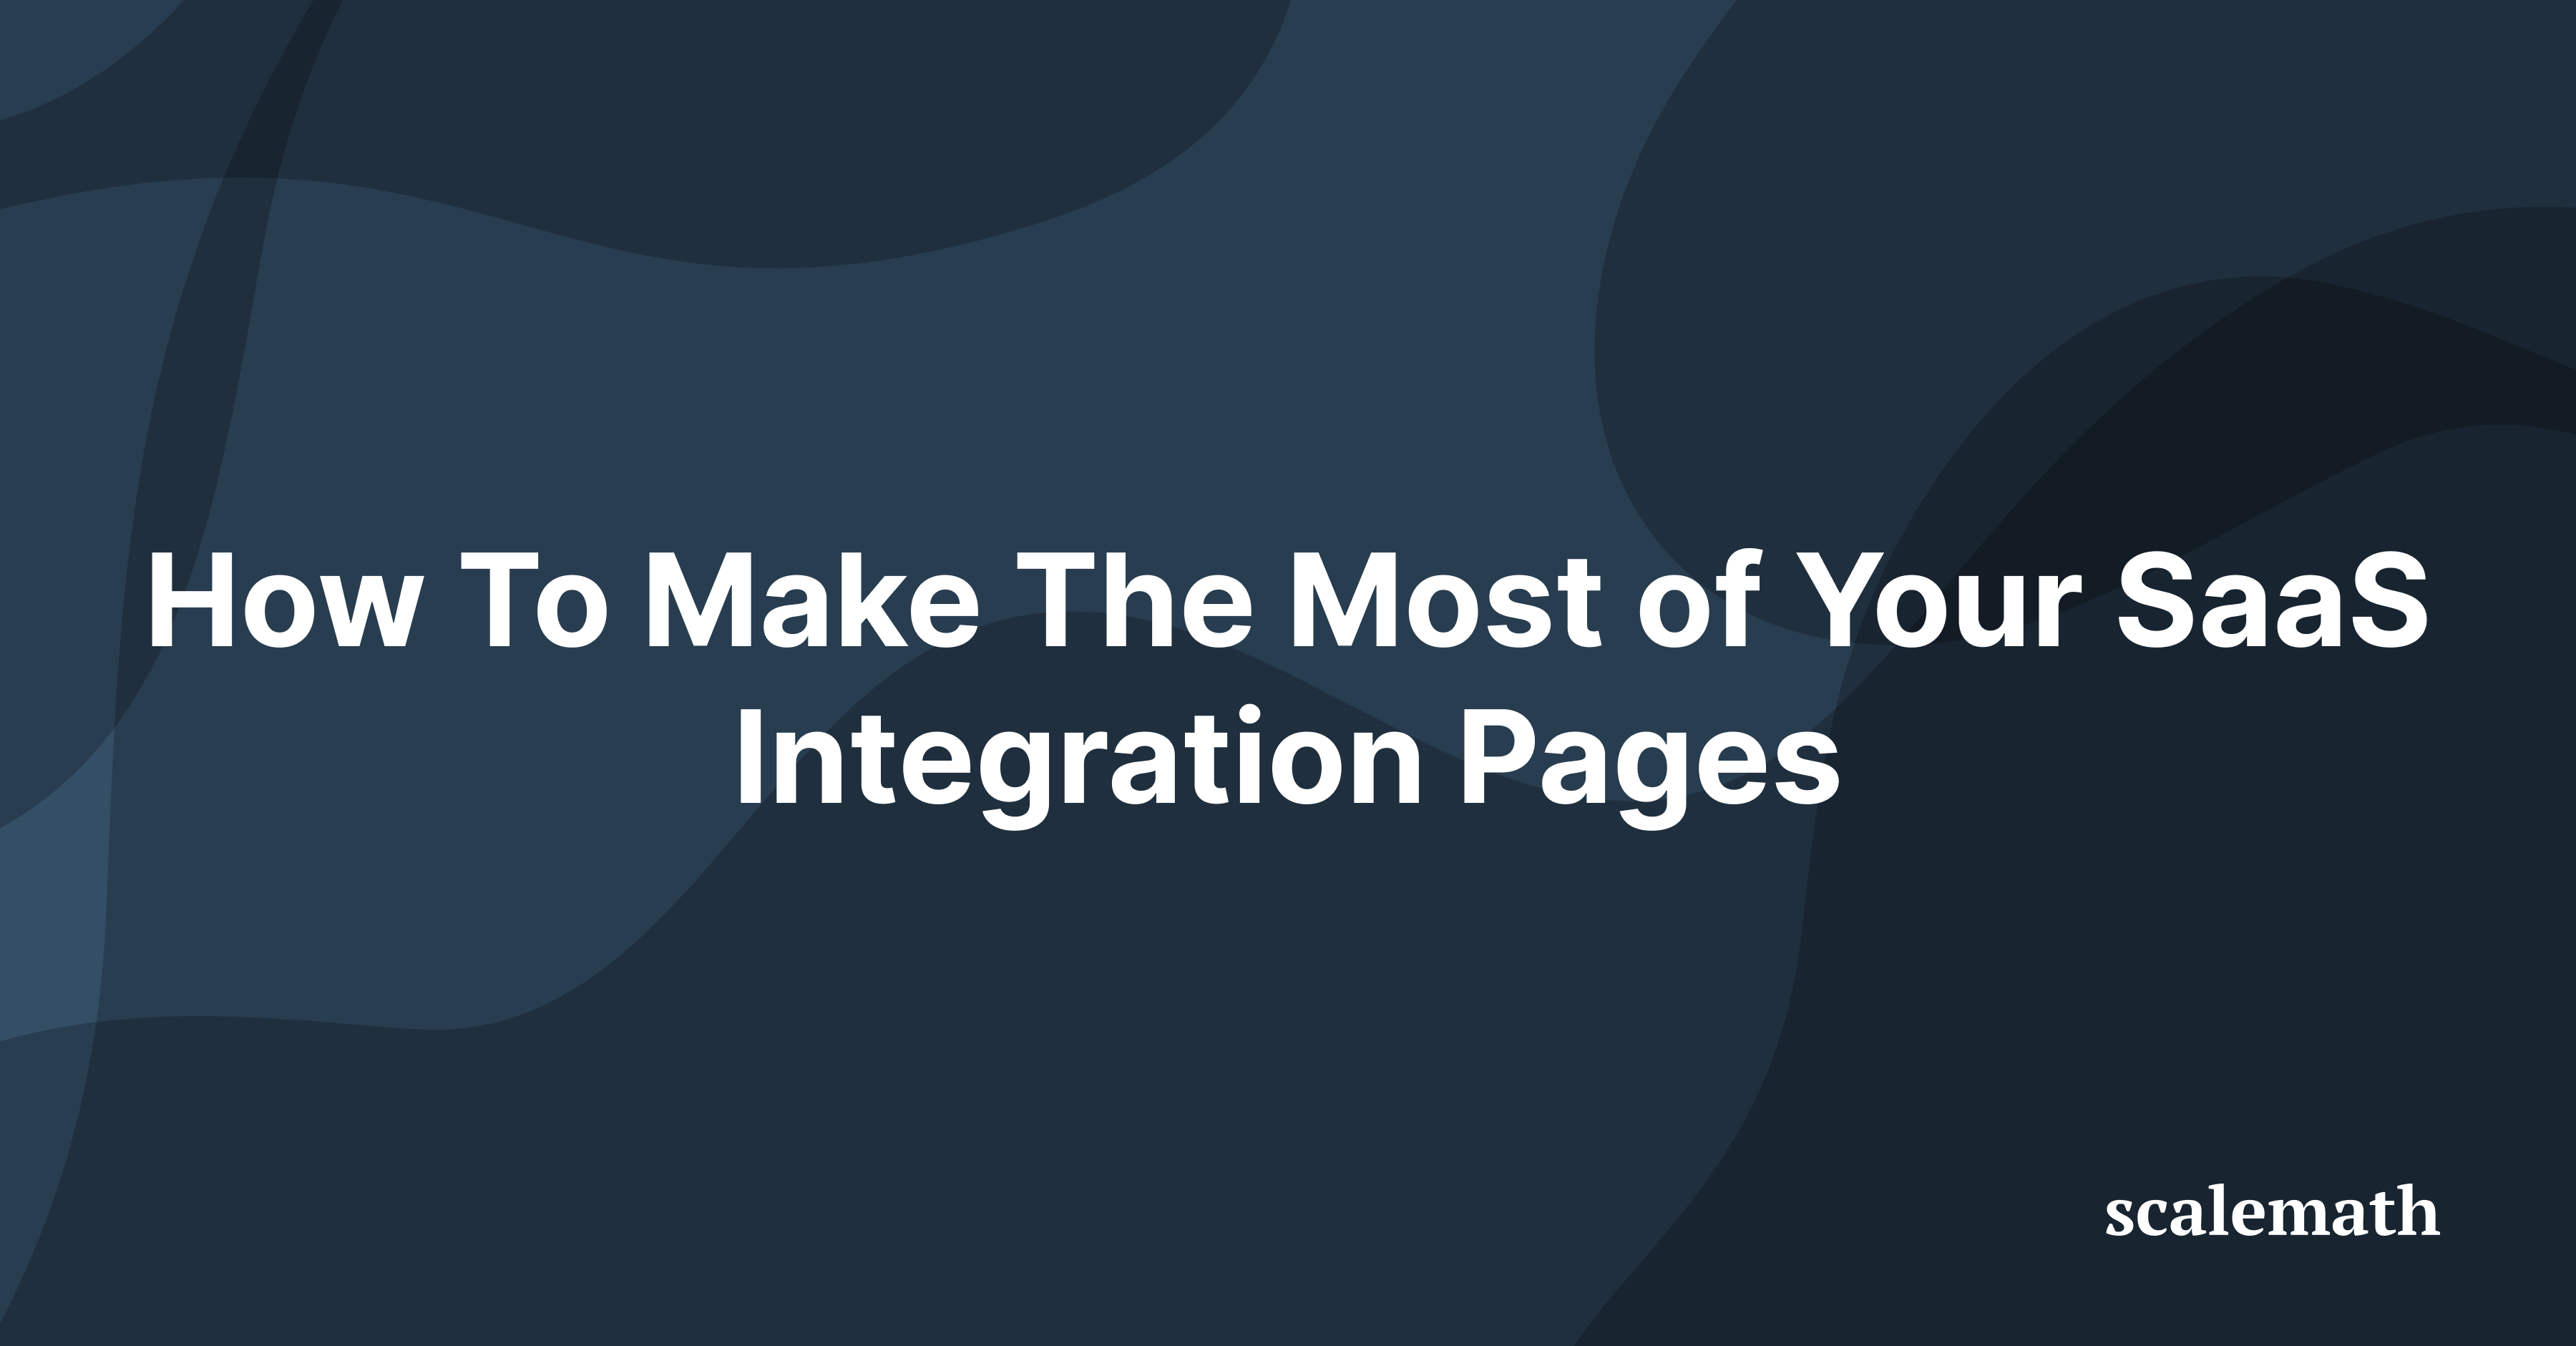 How To Make The Most of Your SaaS Integration Pages